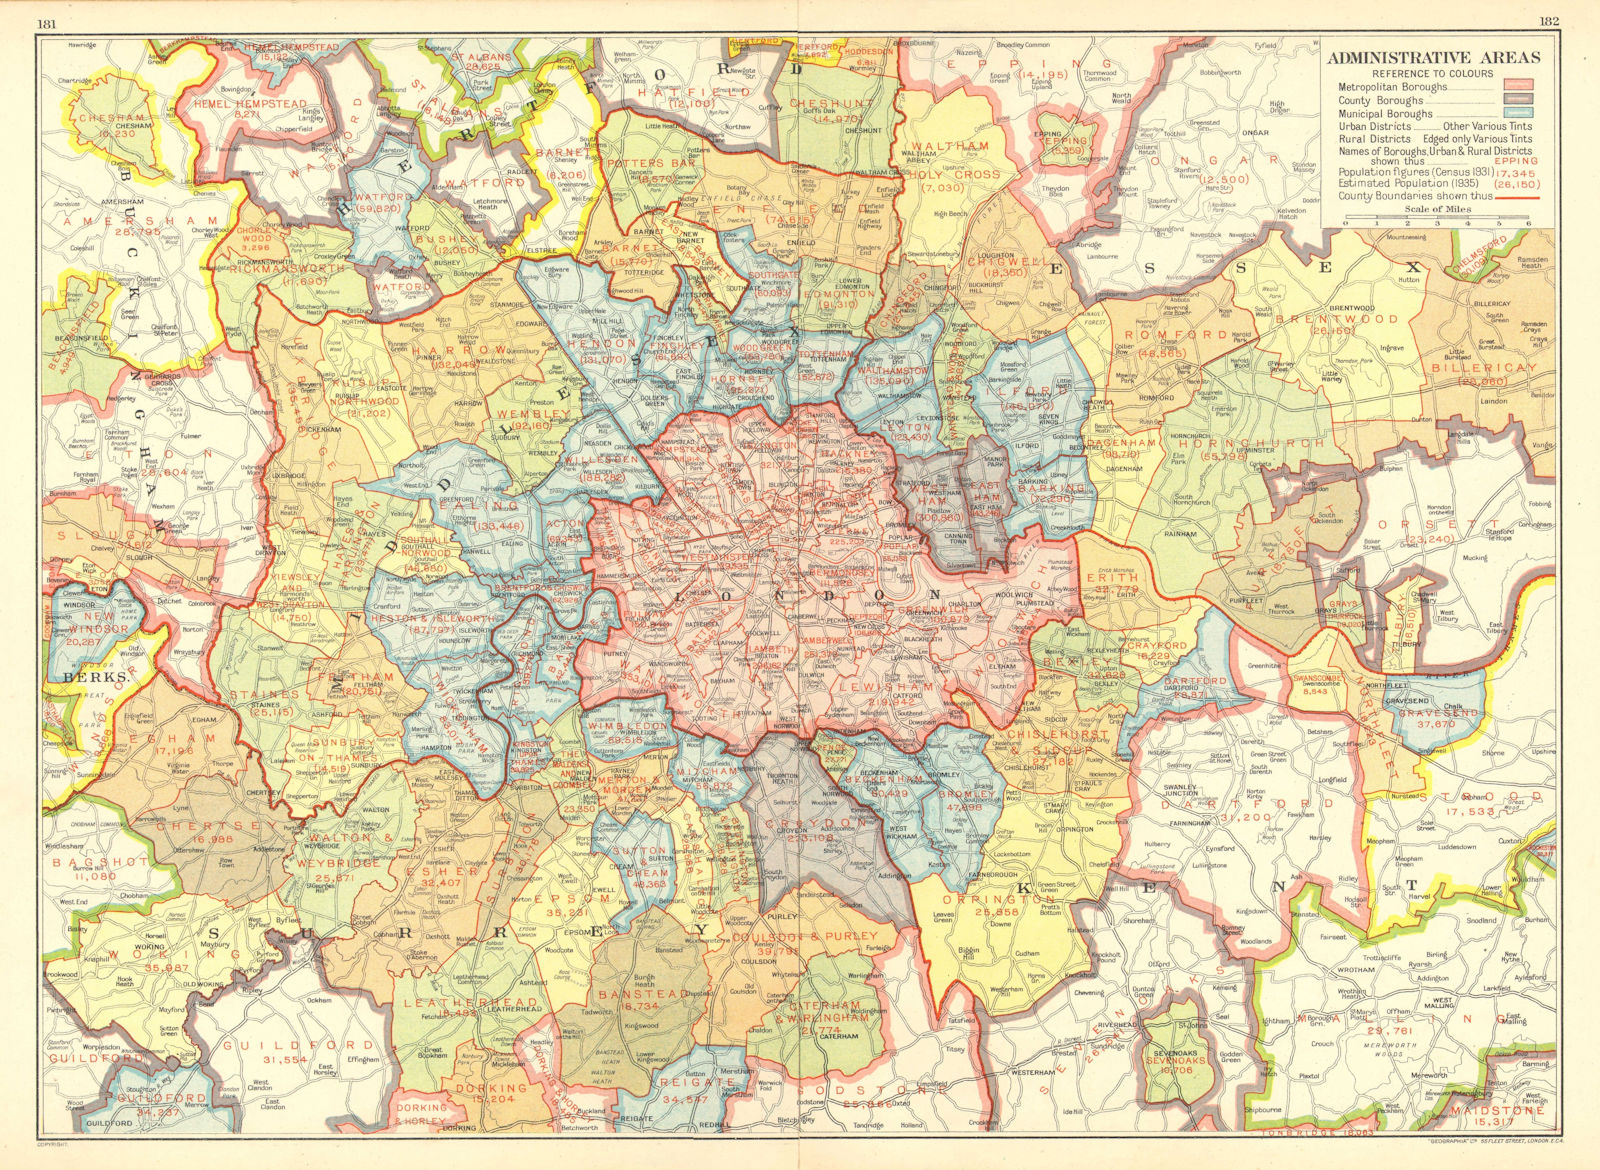 LONDON. Administrative Areas. Municipal Boroughs Local Authorities 1937 map